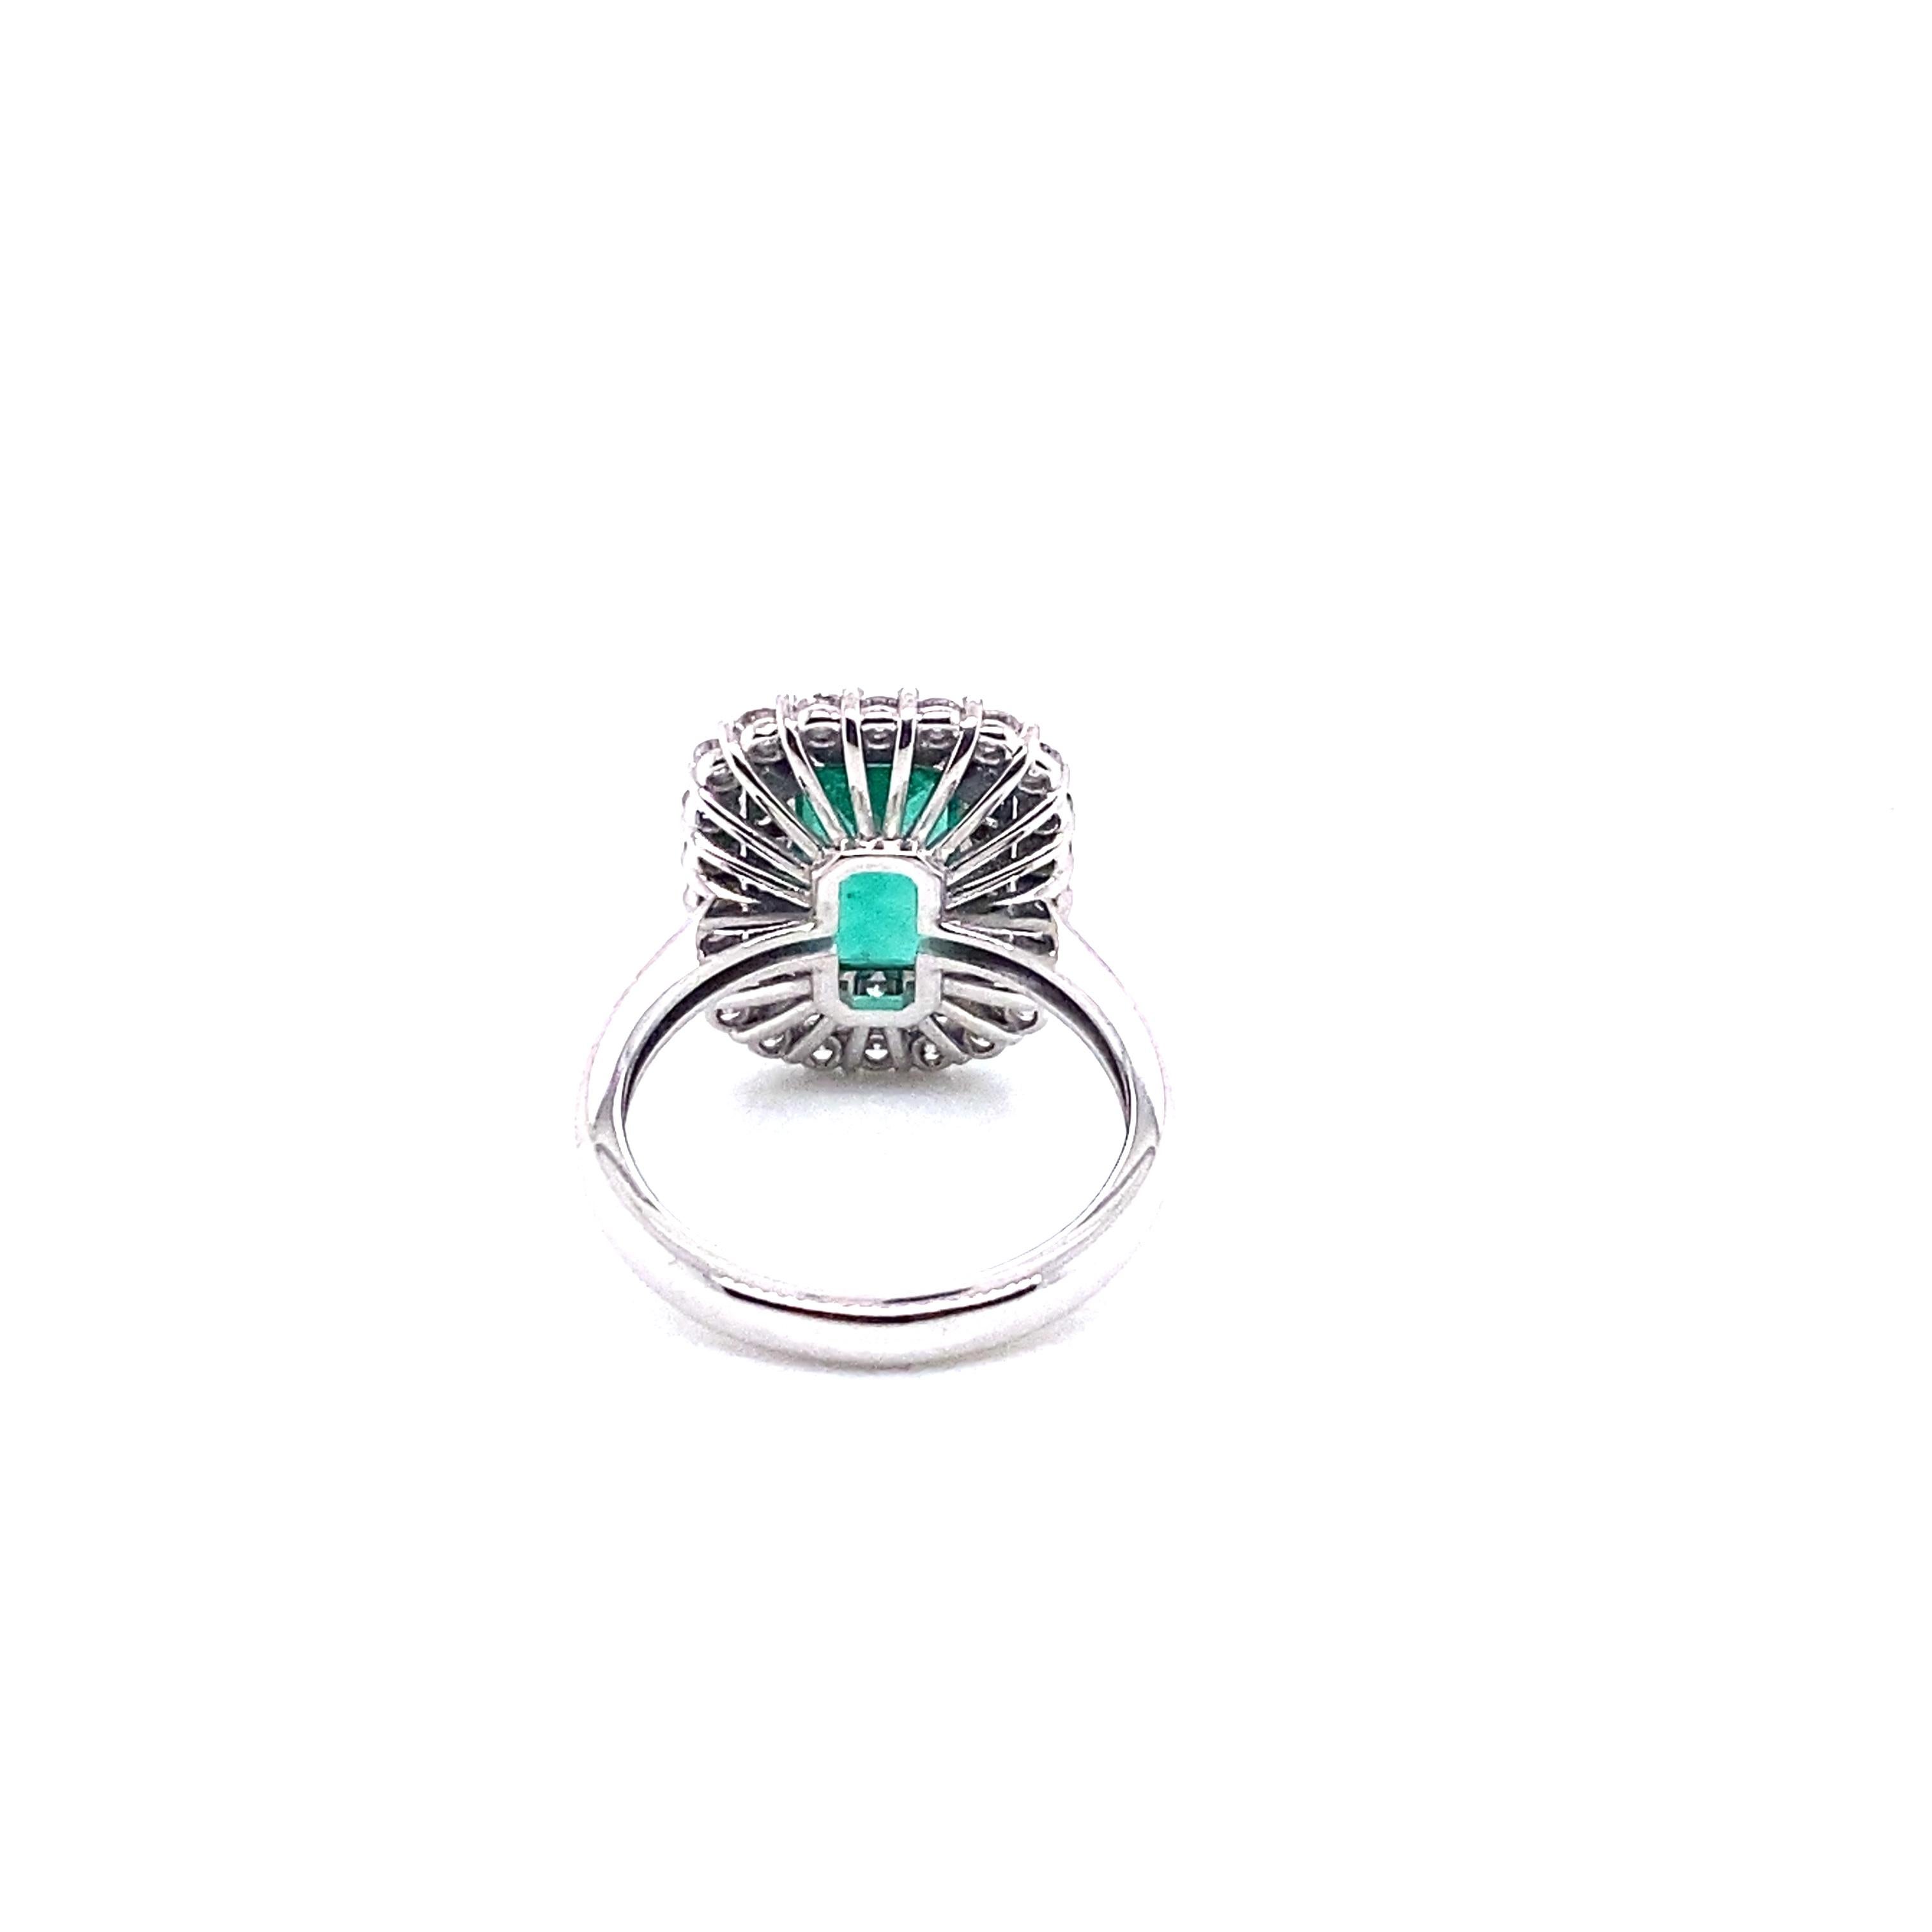 A spectacular, octagon-cut emerald weighing 6.1 carats is surrounded by two rows of diamonds rated G VS and weighing 1.04 carats and is set in beautiful 18-karat white gold for this magnificent ring. This cocktail ring was hand-made using